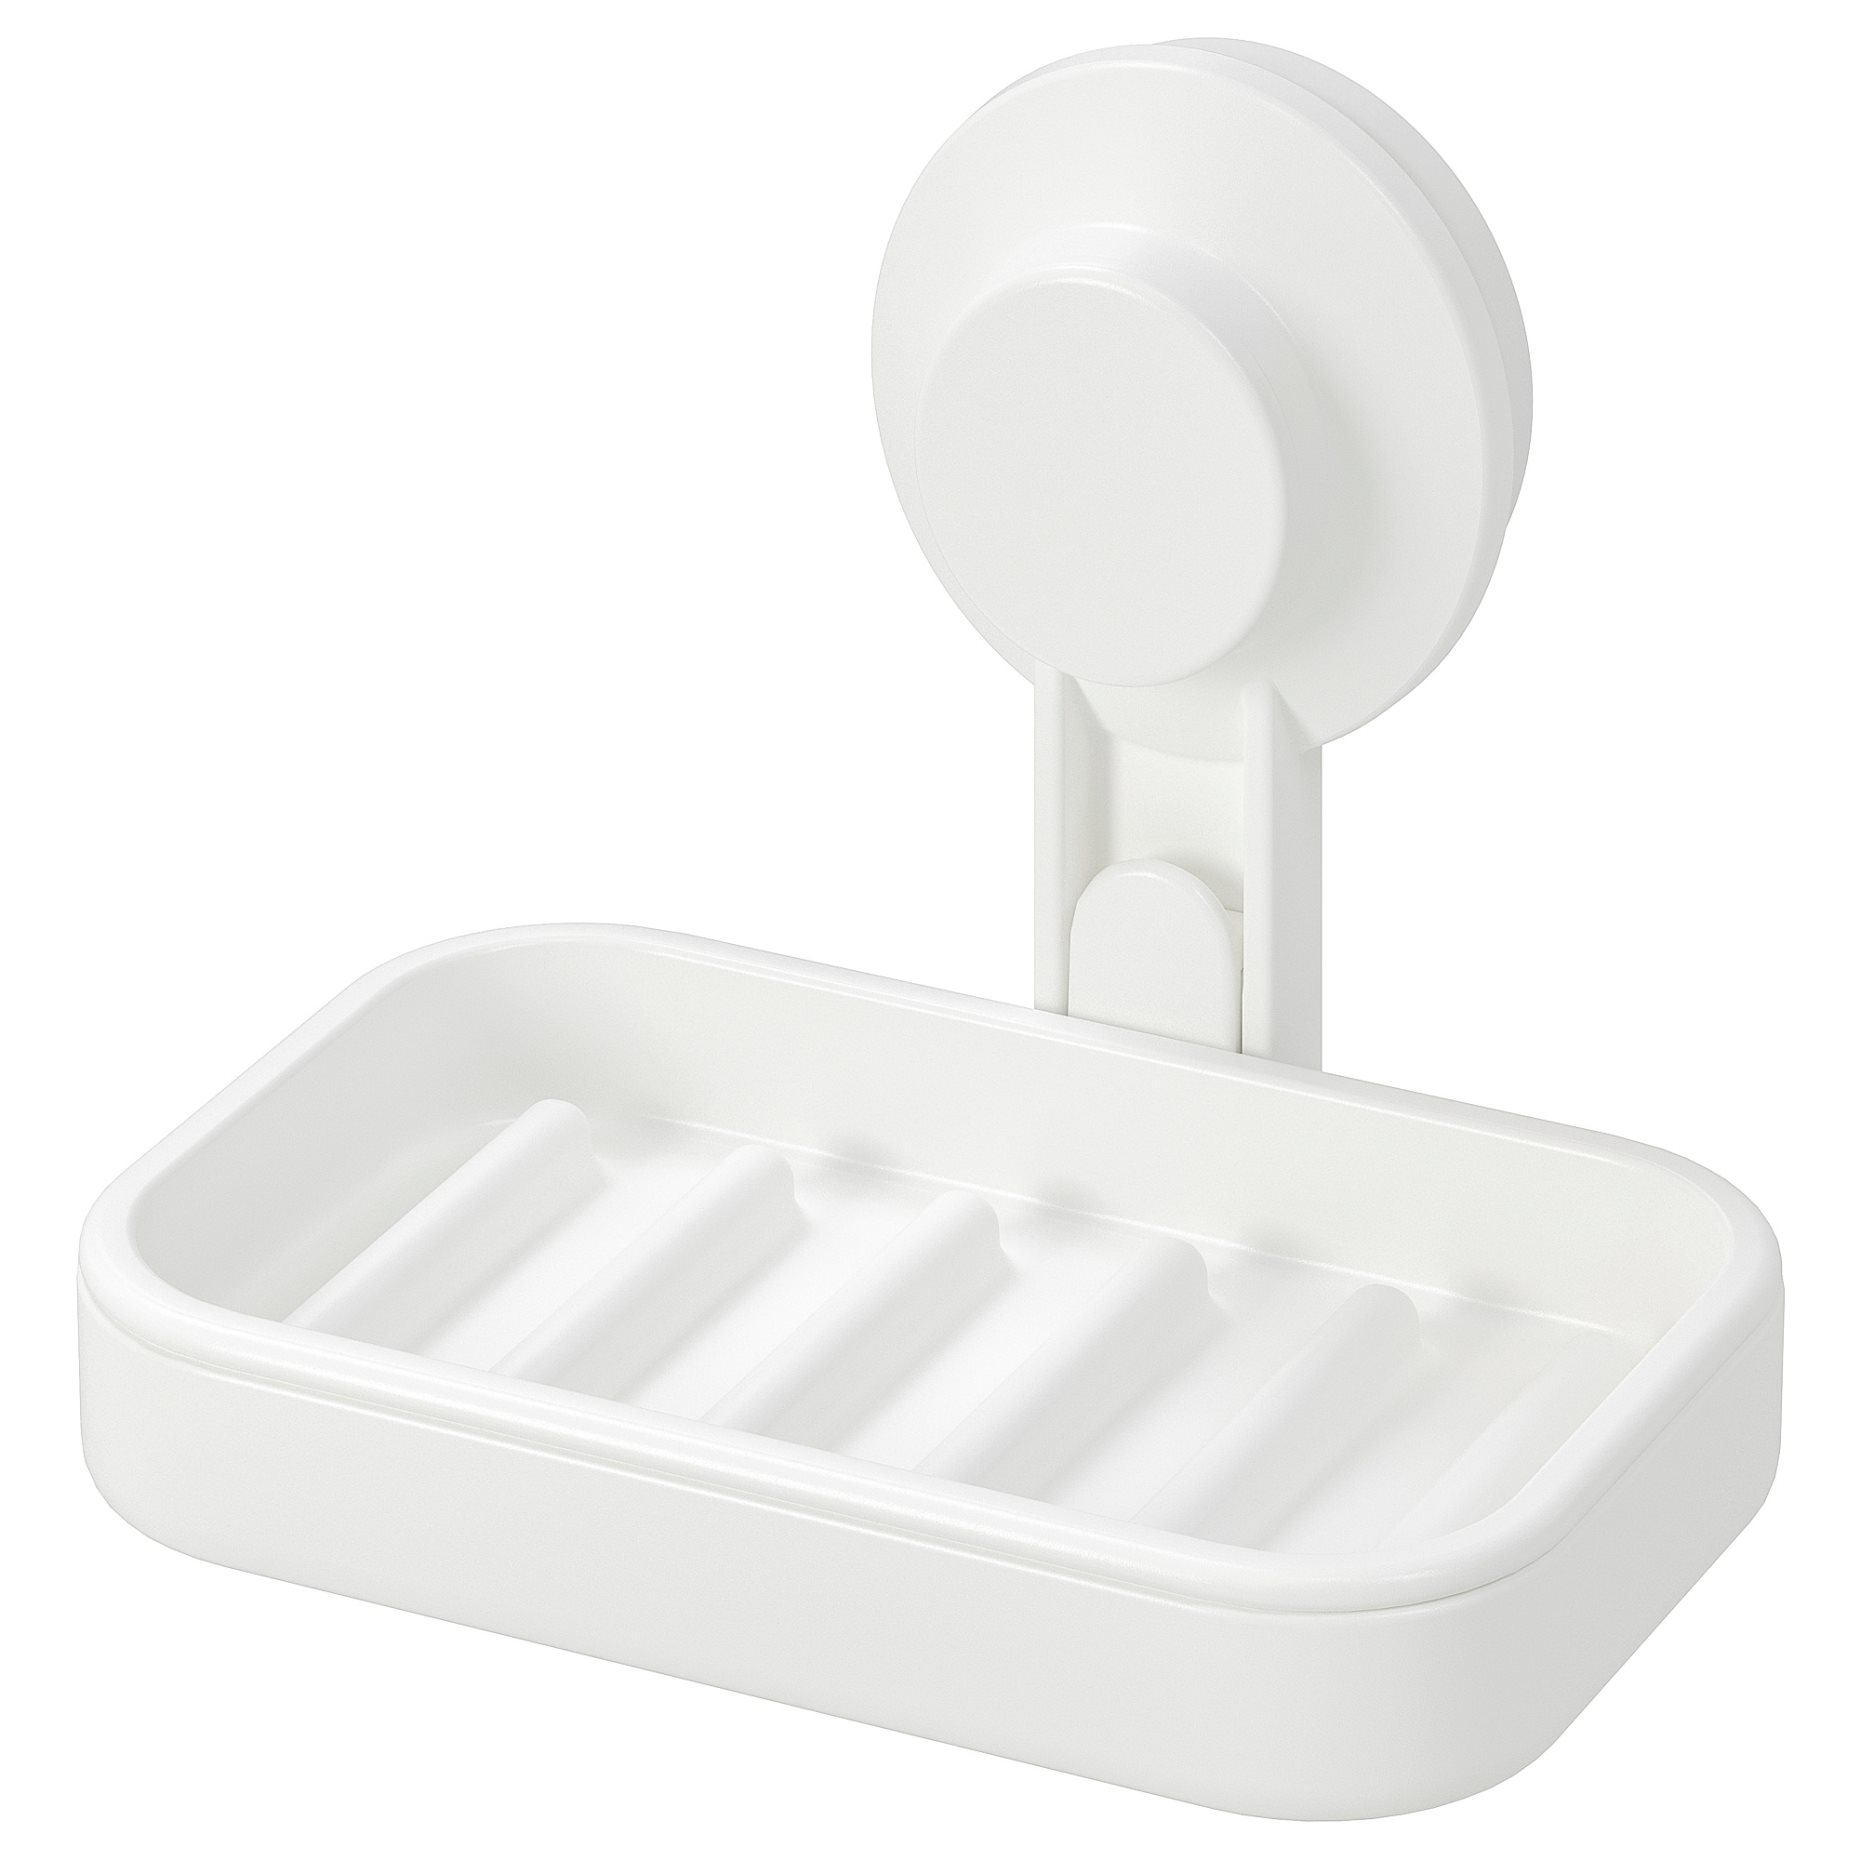 TISKEN, soap dish with suction cup, 903.812.84